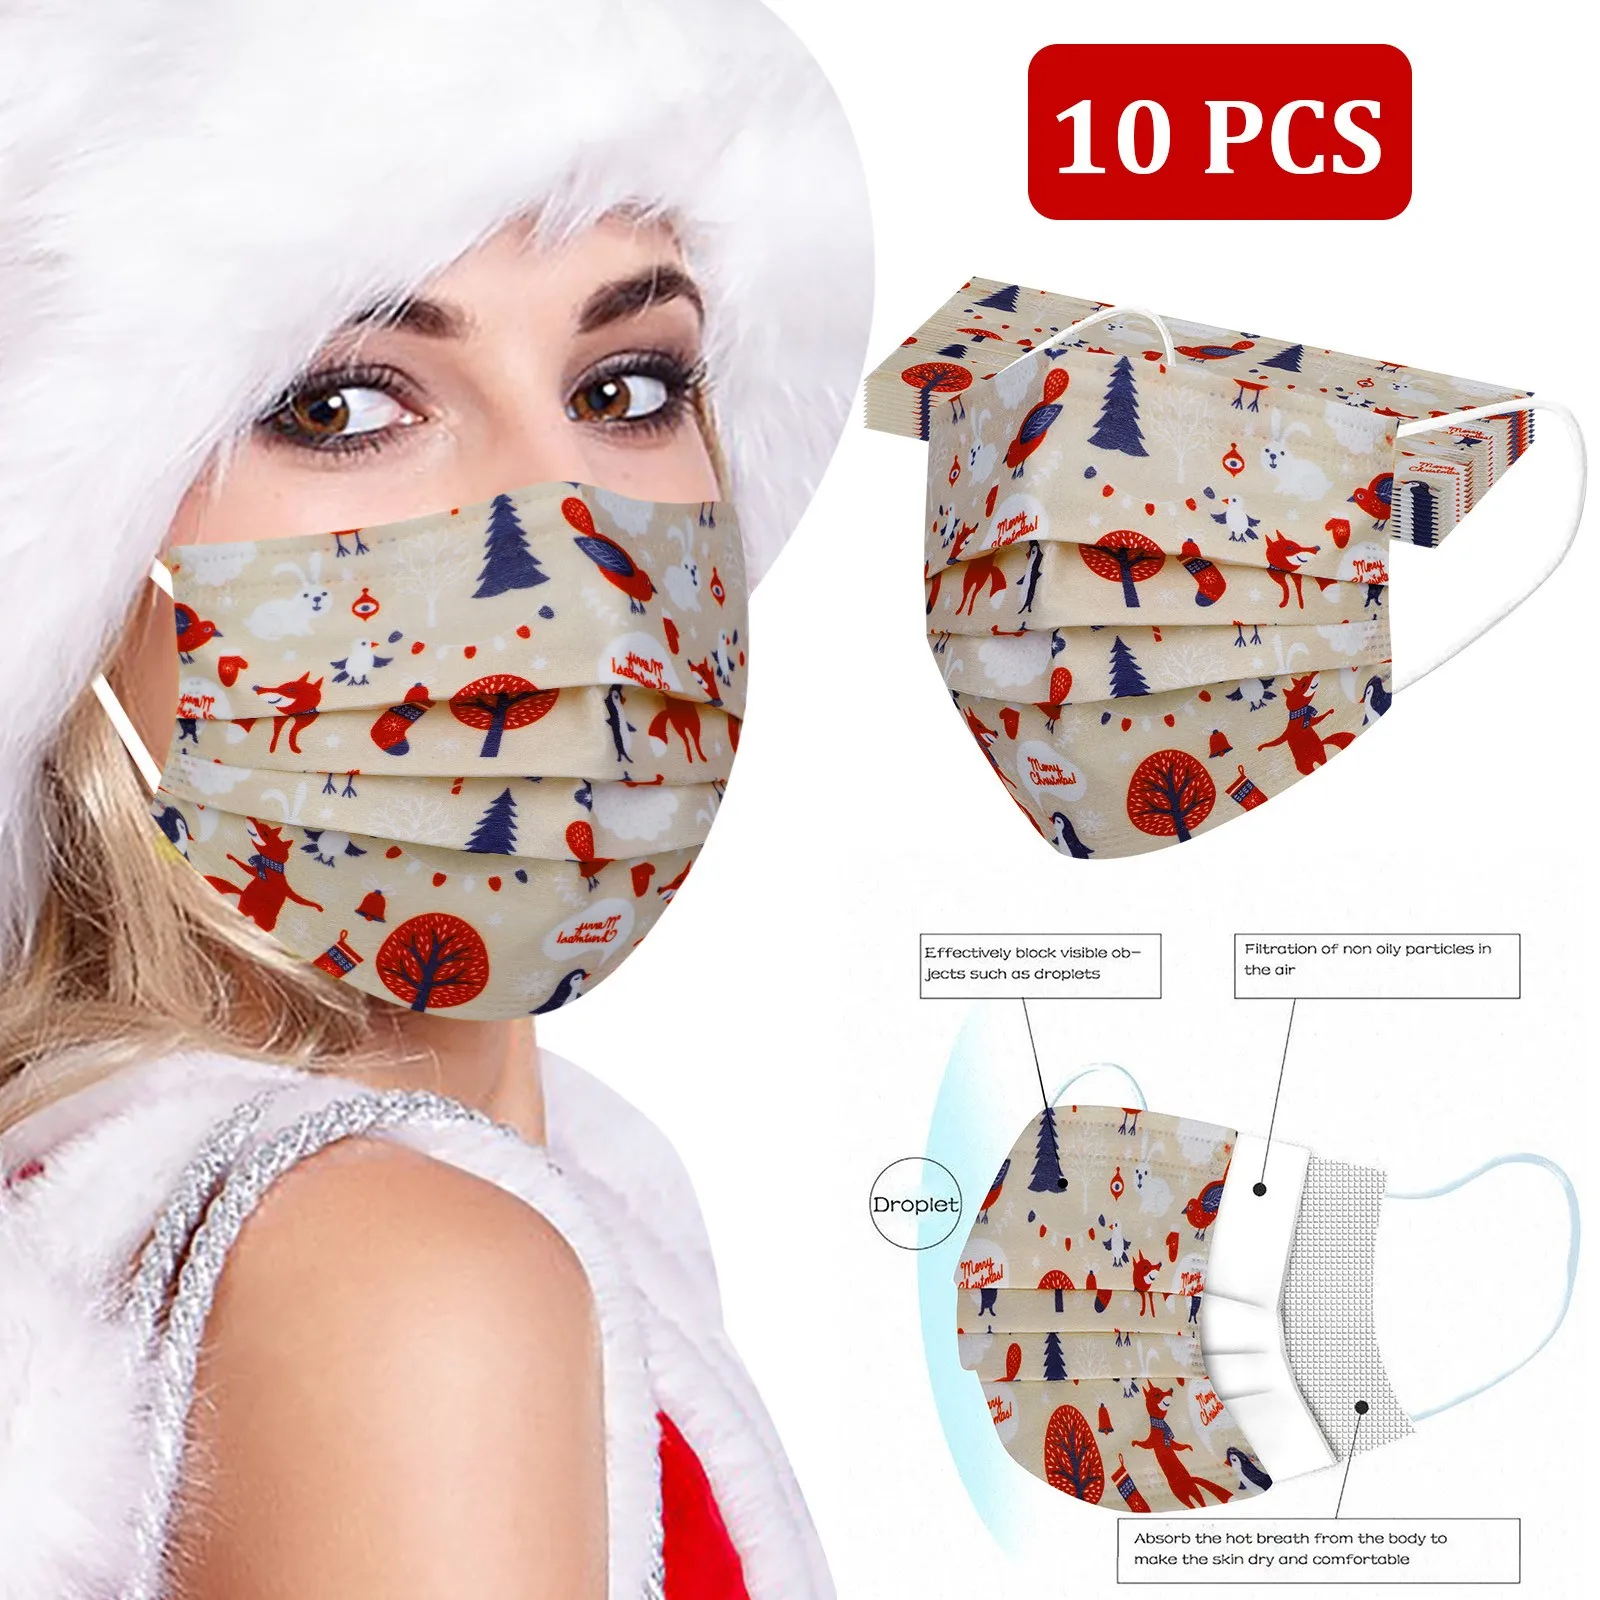 

10PCS Disposable Mask 3Ply Ear Loop Filter Protective Mask Aldult Face Mouth Mask Earloop Christmas Cosplay маска mascarillas